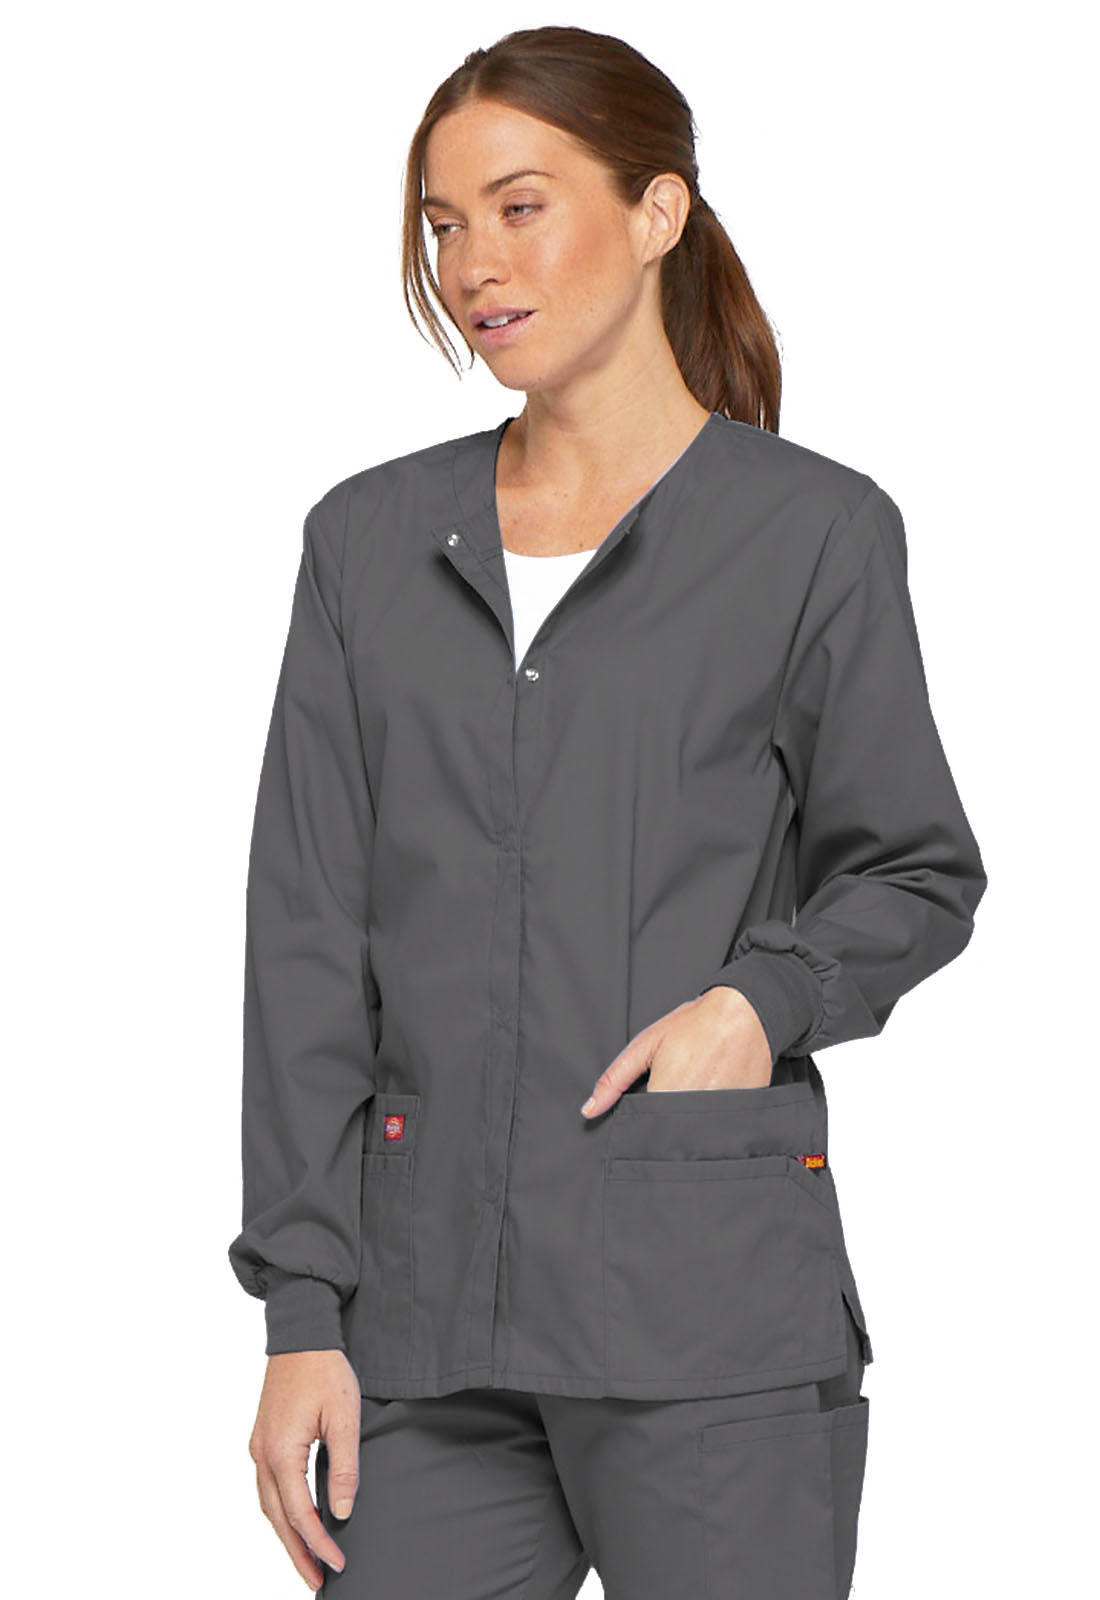 PFA Cubrepolvos Mujer Dickies EDS Signature Mod.86306 Pewter